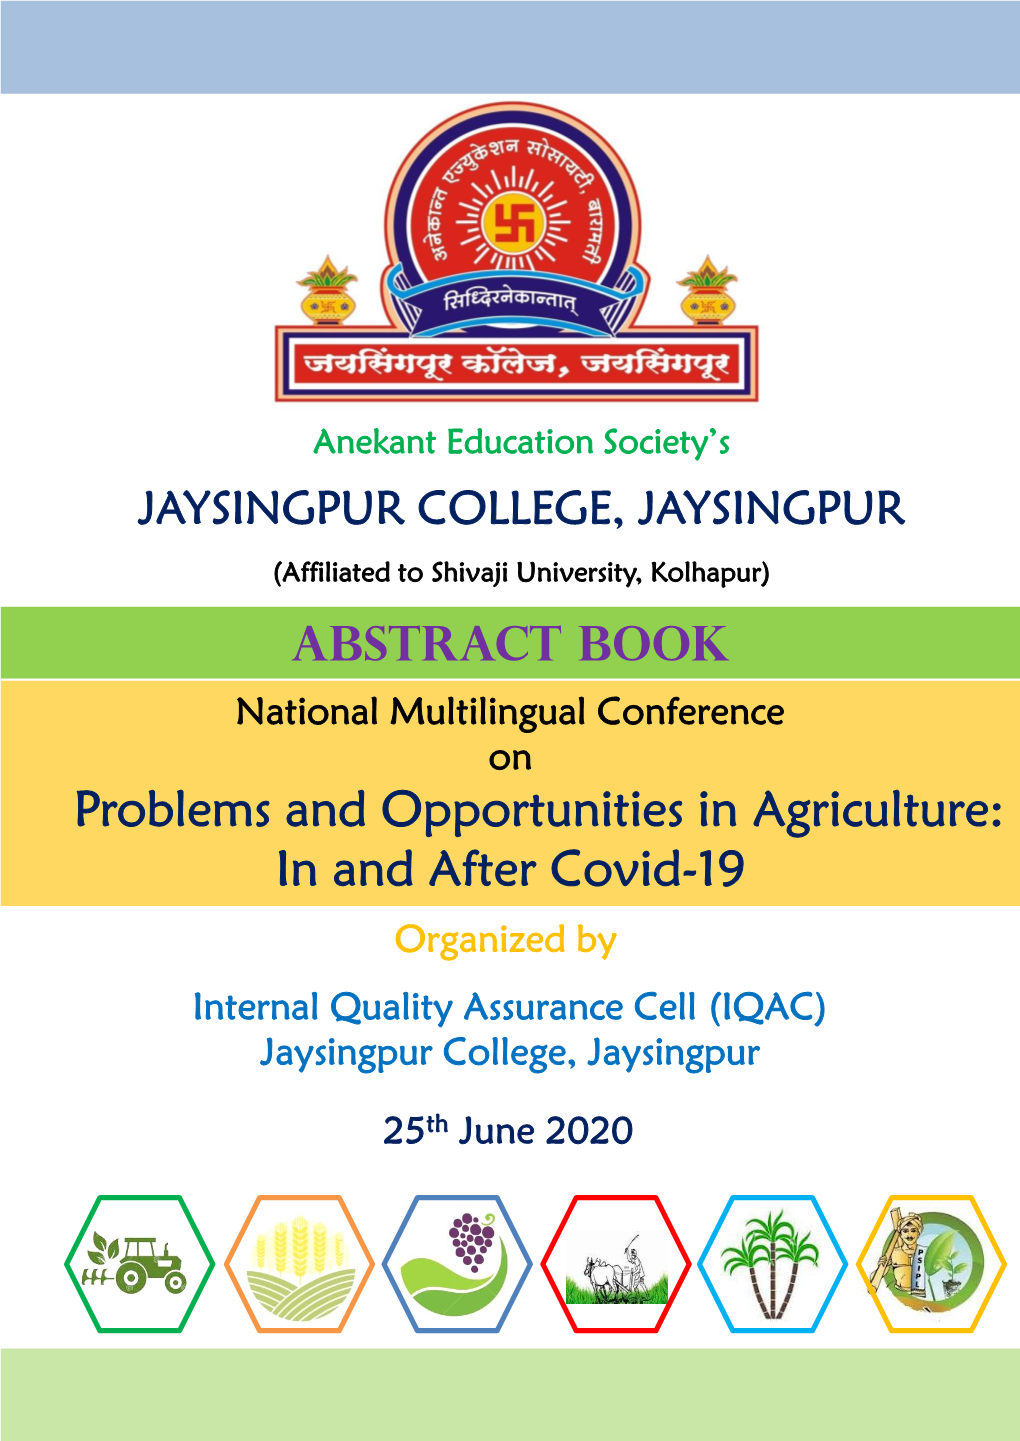 Problems and Opportunities in Agriculture: in and After Covid-19 Organized by Internal Quality Assurance Cell (IQAC) Jaysingpur College, Jaysingpur